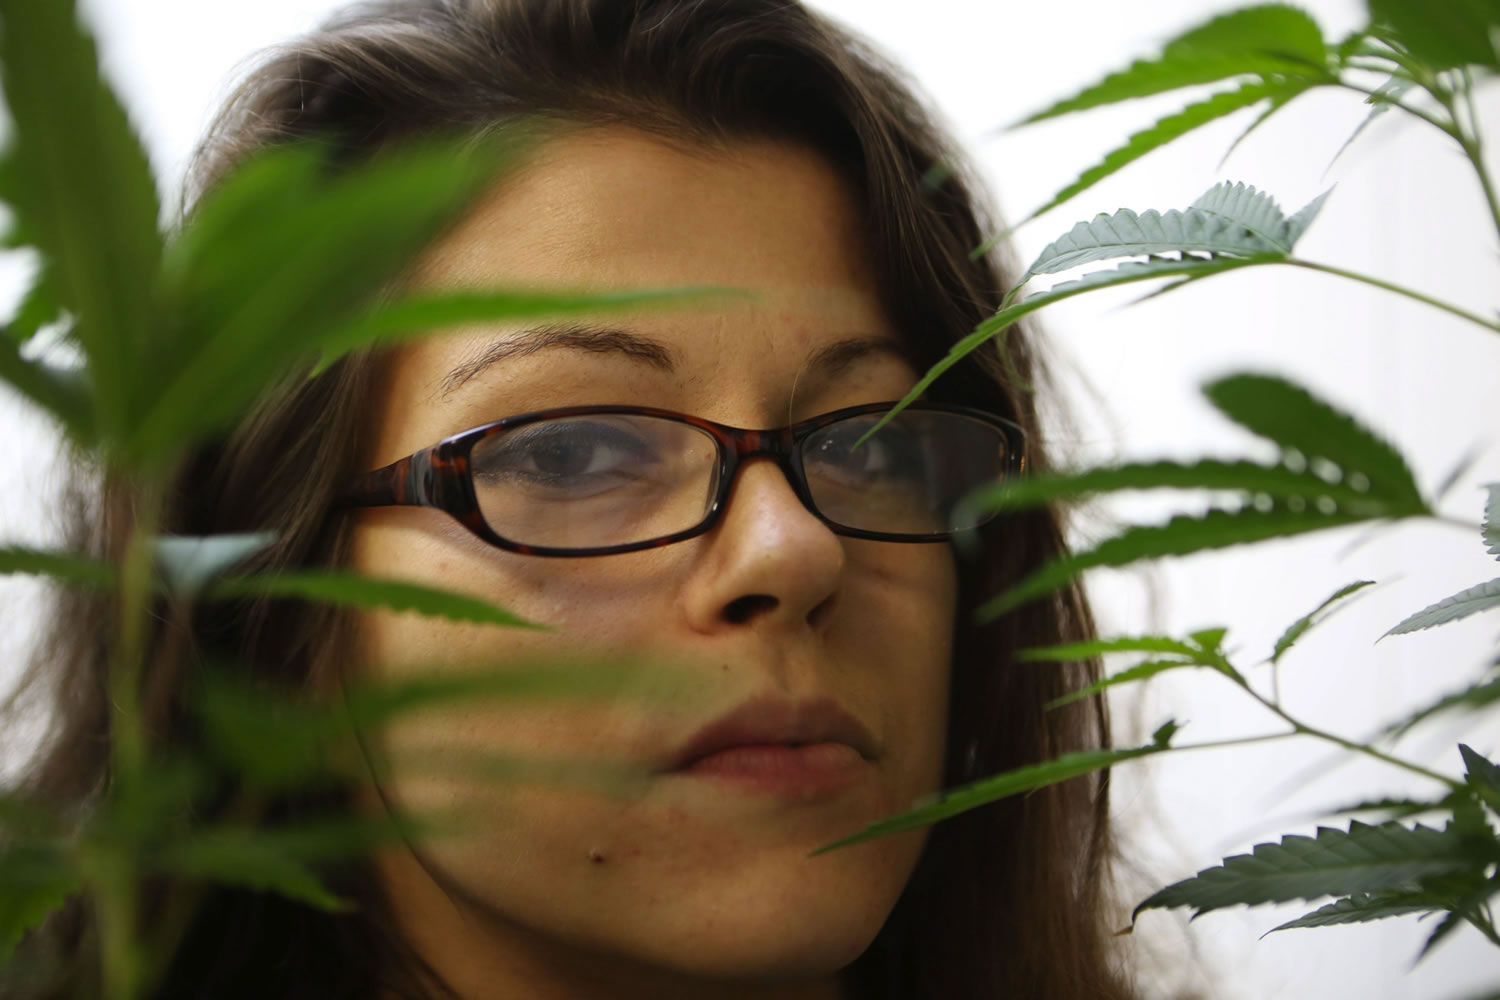 Lydia Ensley, operations manager for a Seattle medical marijuana dispensary, the Center for Palliative Care, is a woman working in the male-dominated and sometimes sexist pot industry.